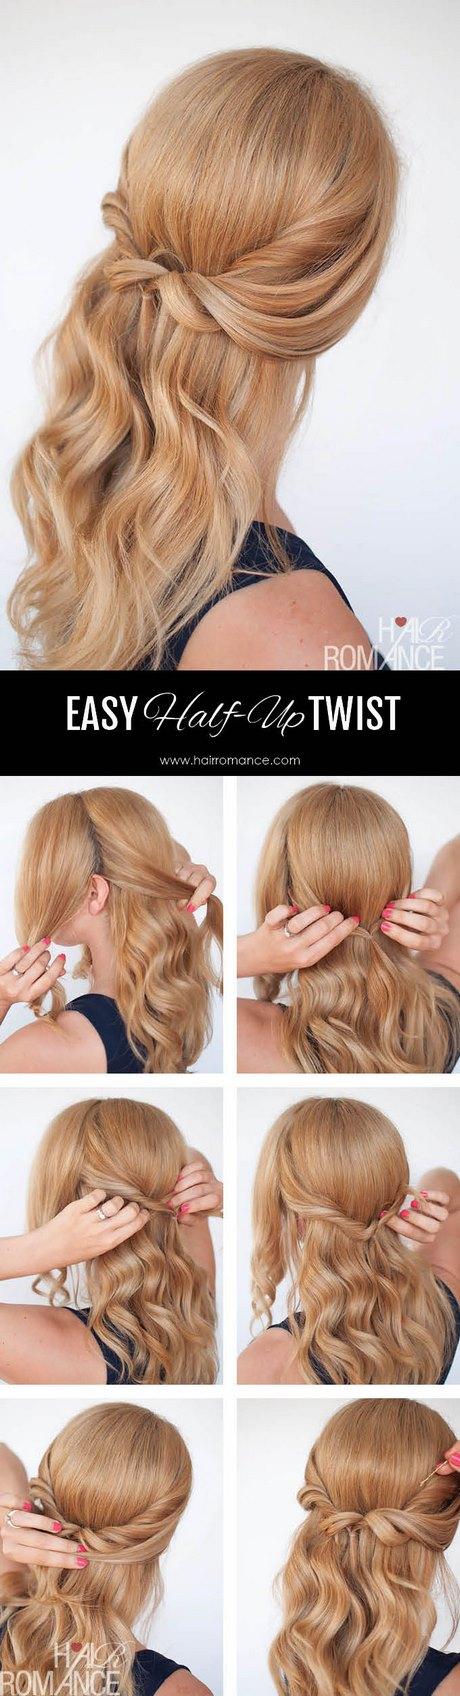 Easy half up hairstyles for long hair easy-half-up-hairstyles-for-long-hair-41_11